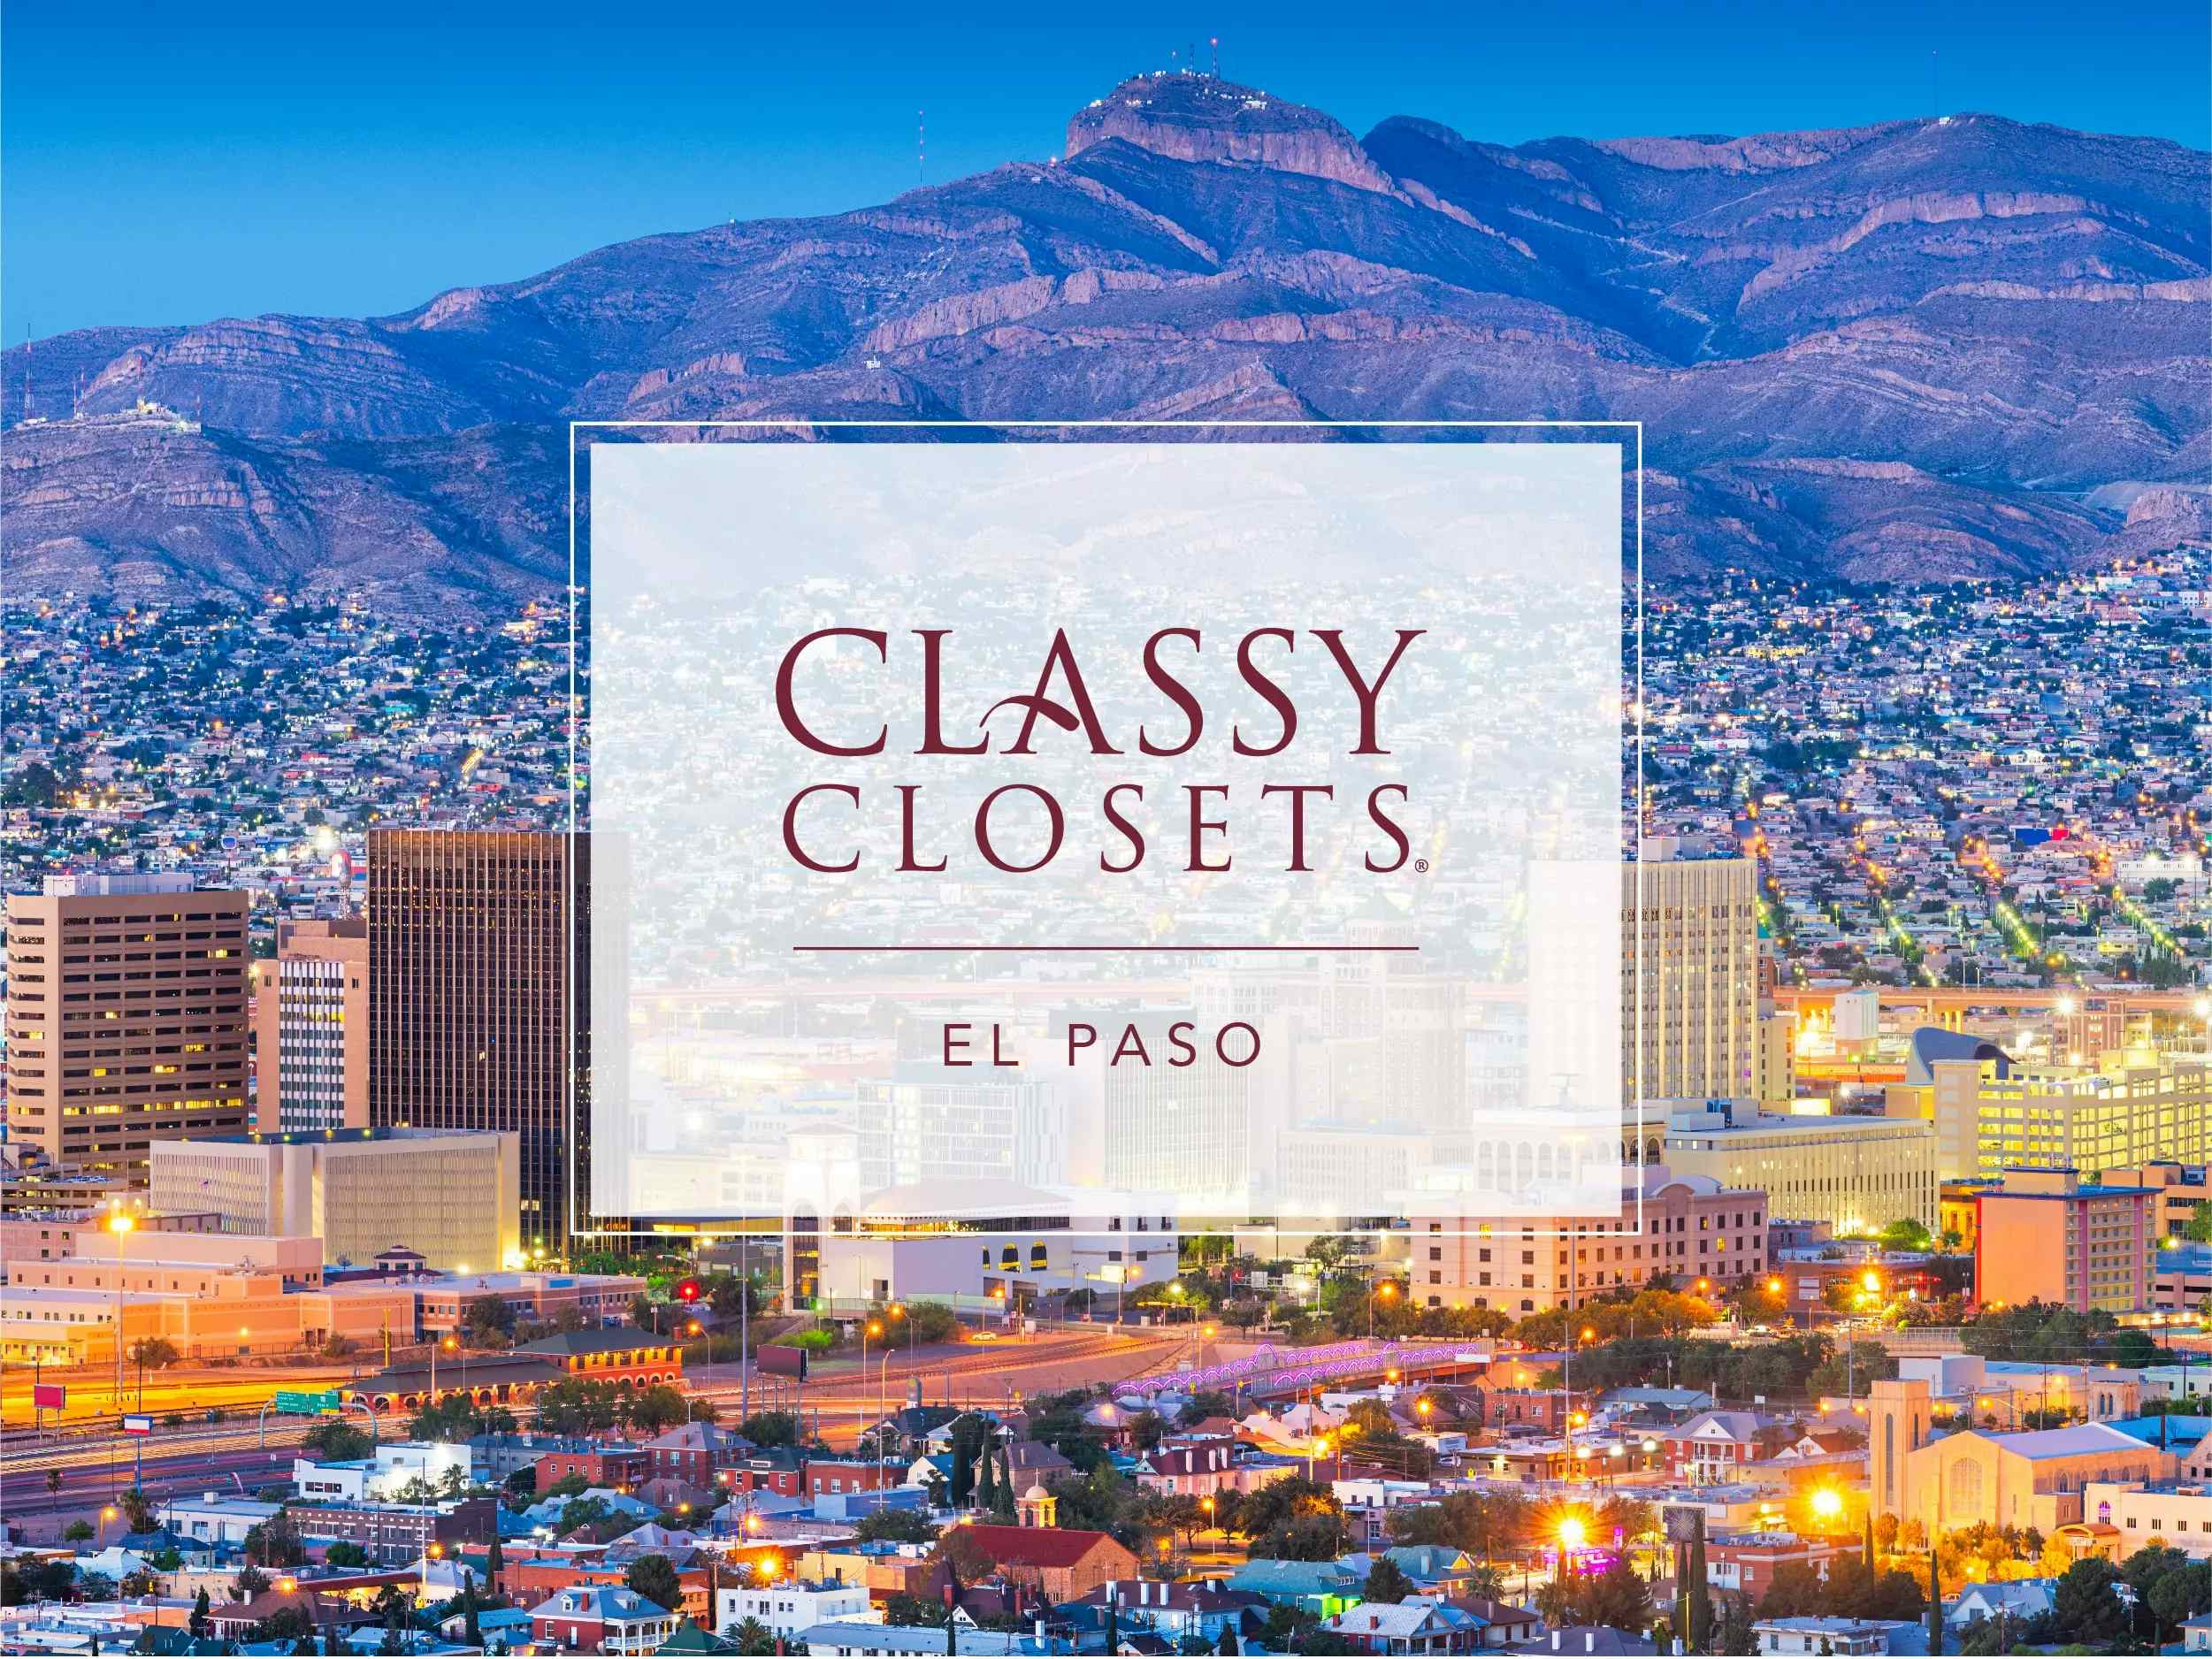 showroom on the location page-/images/locations/el-paso.webp